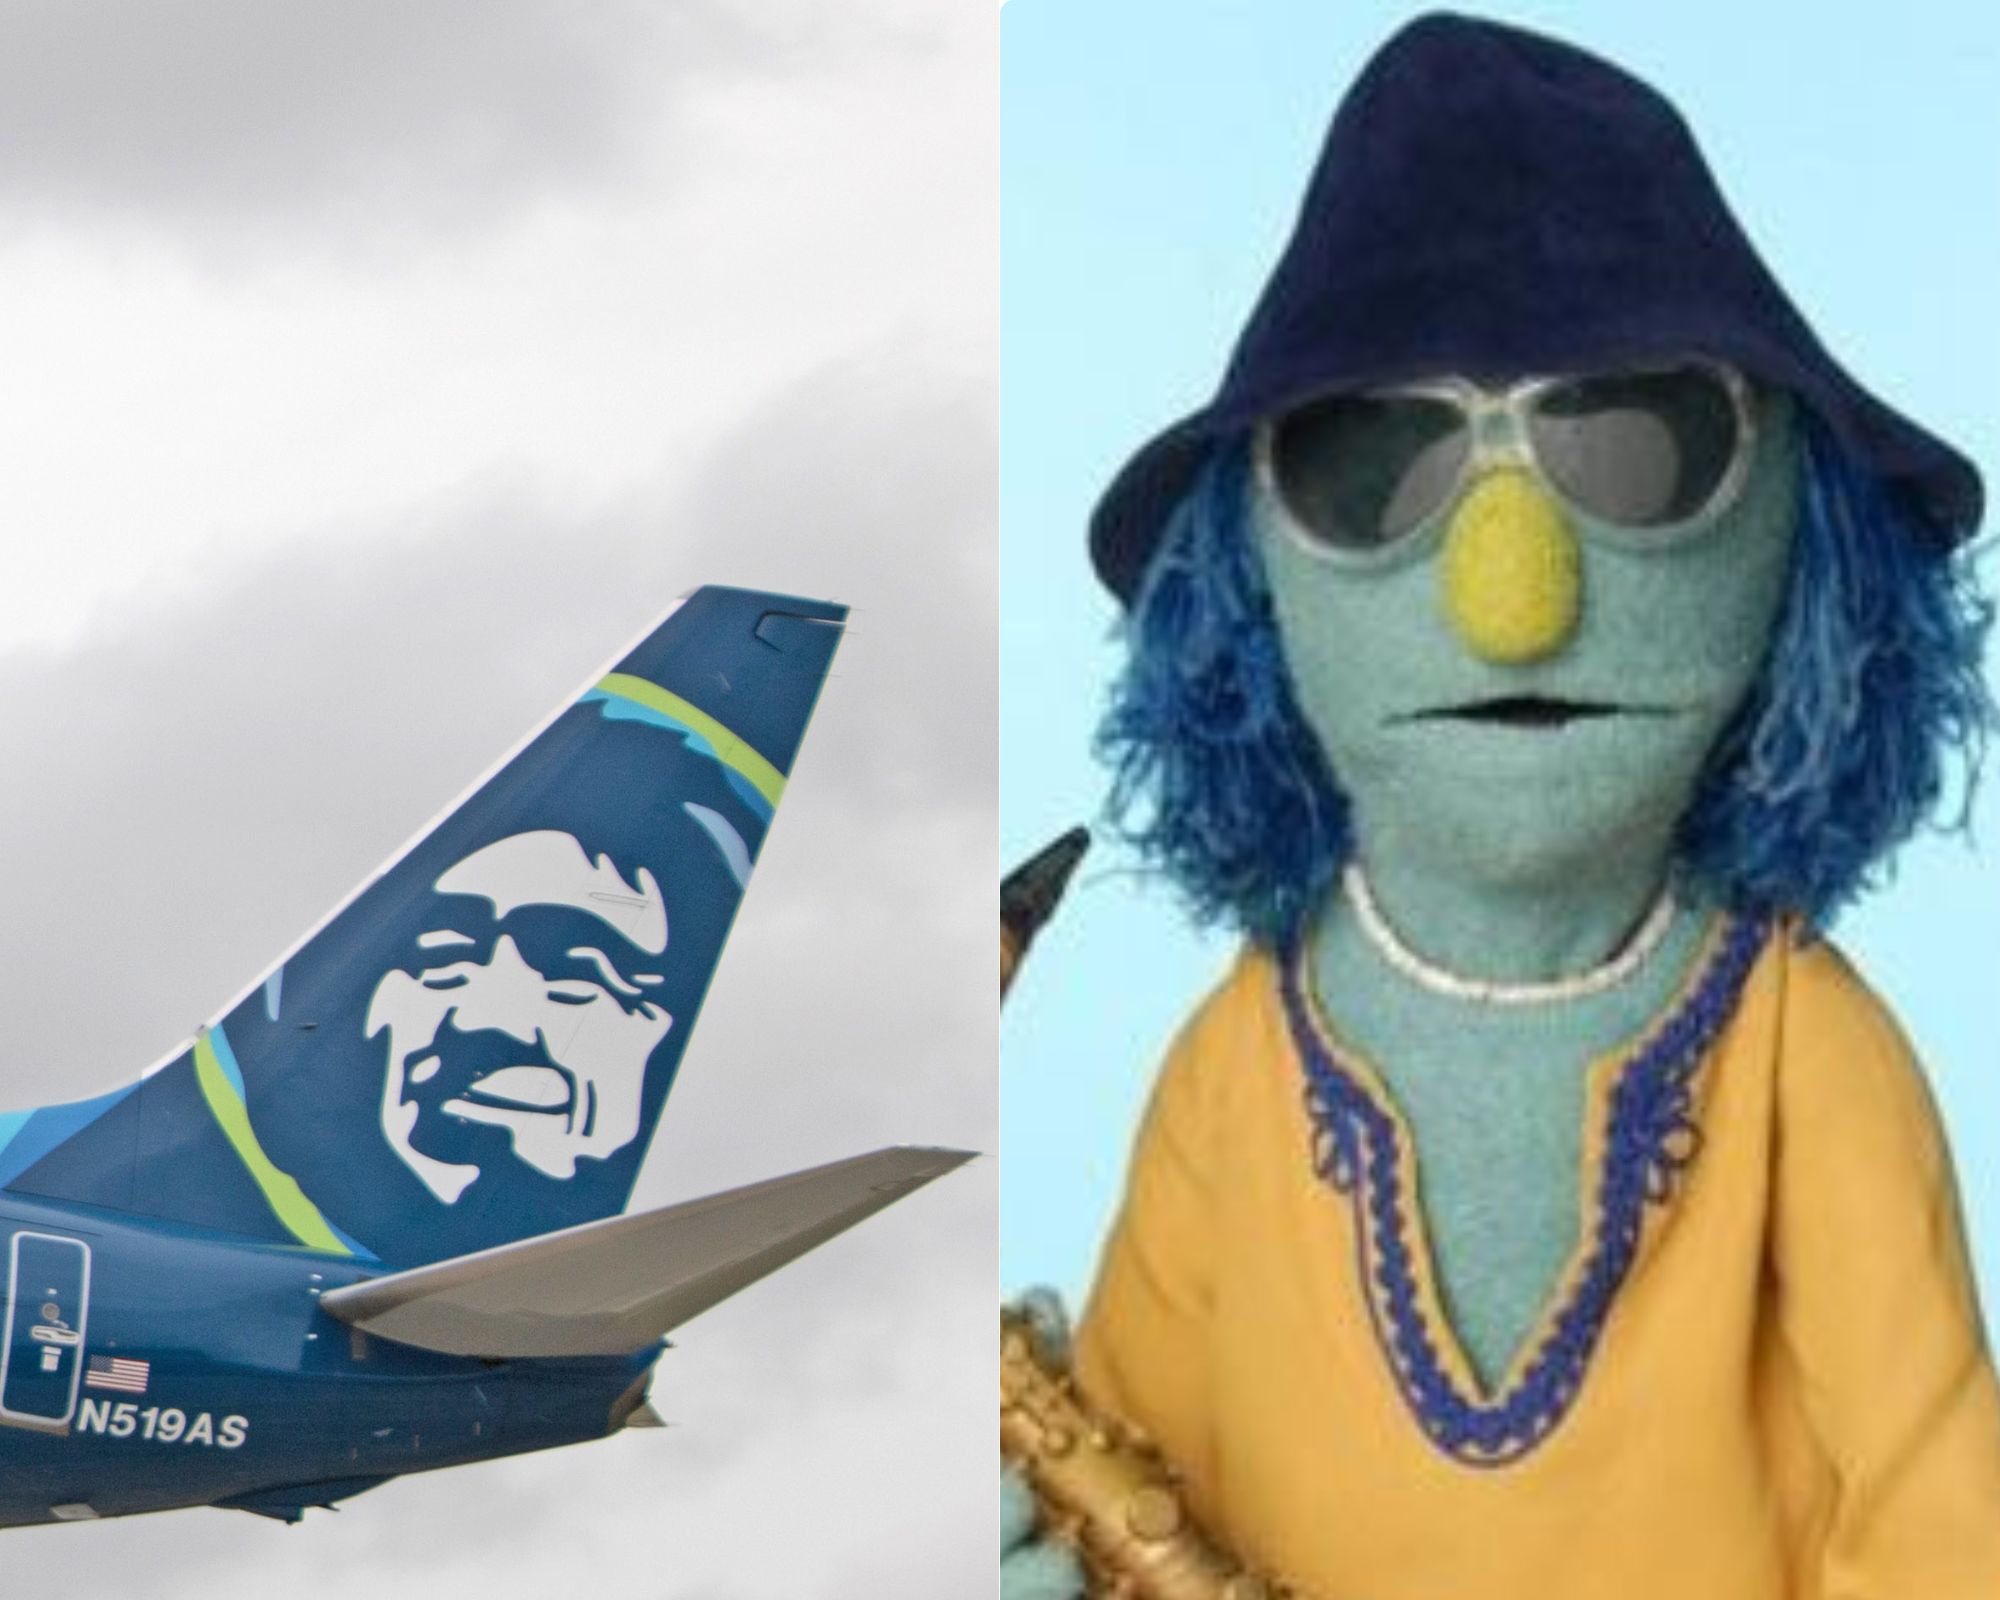 muppets as airlines mco airport